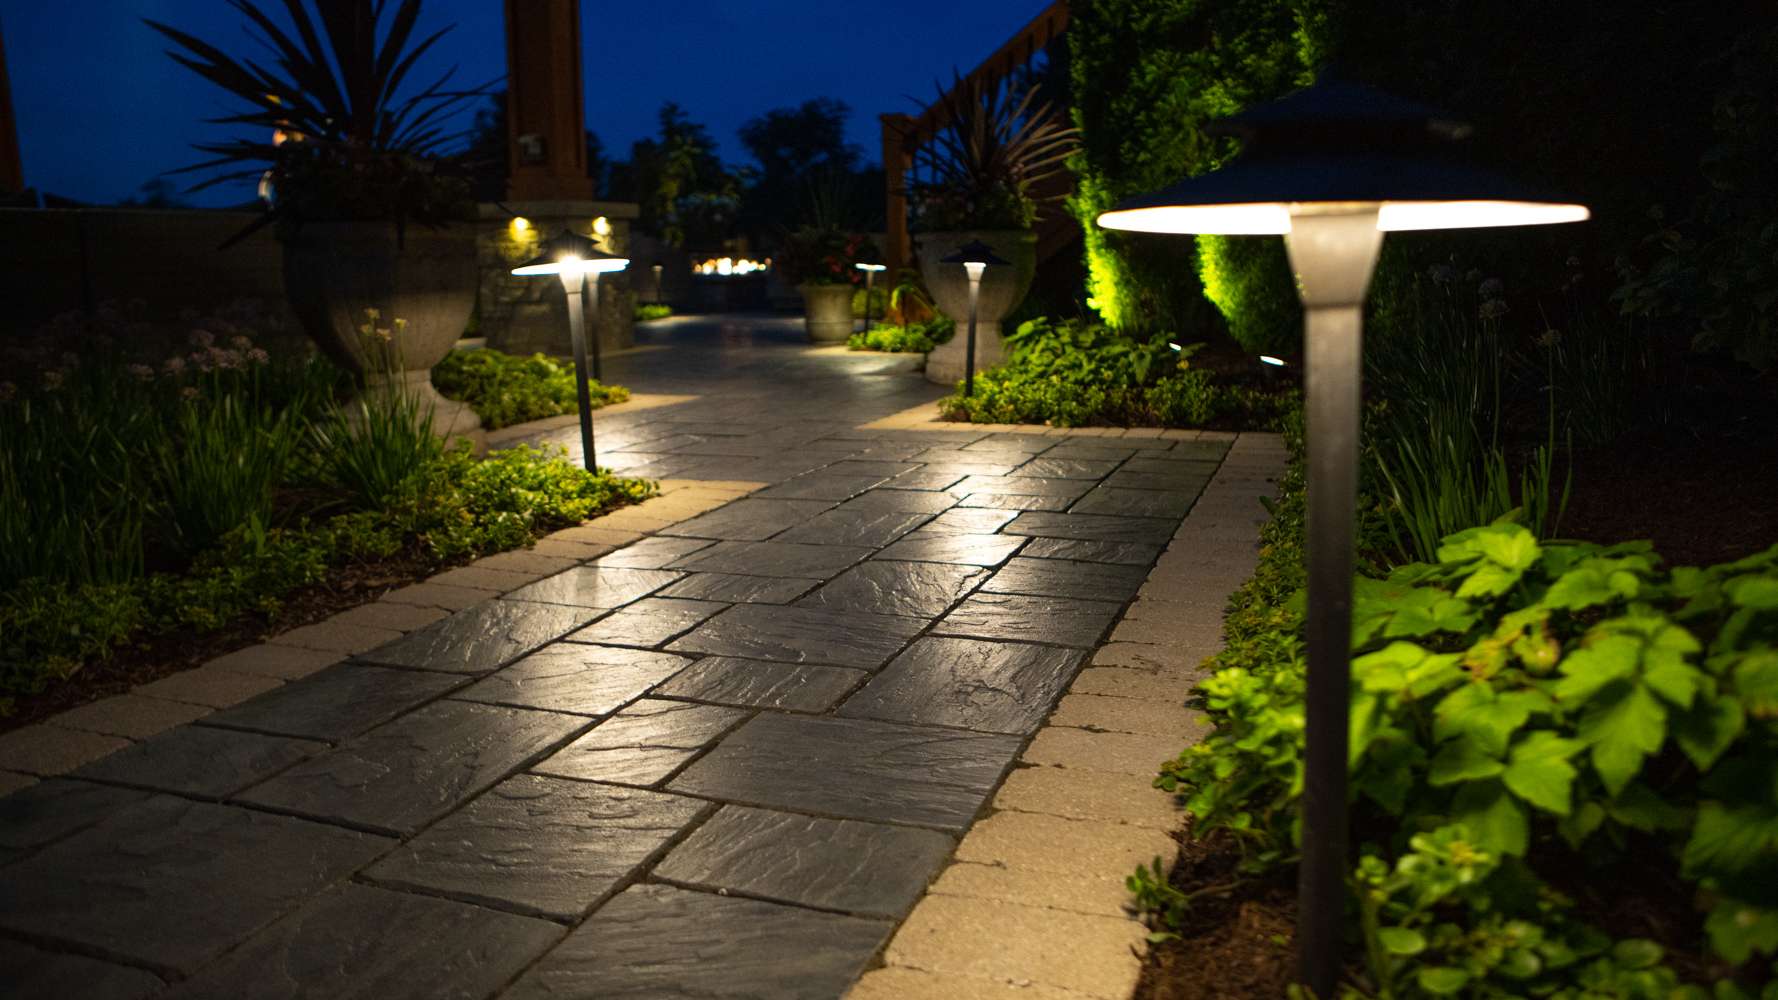 Staggered pathway lighting